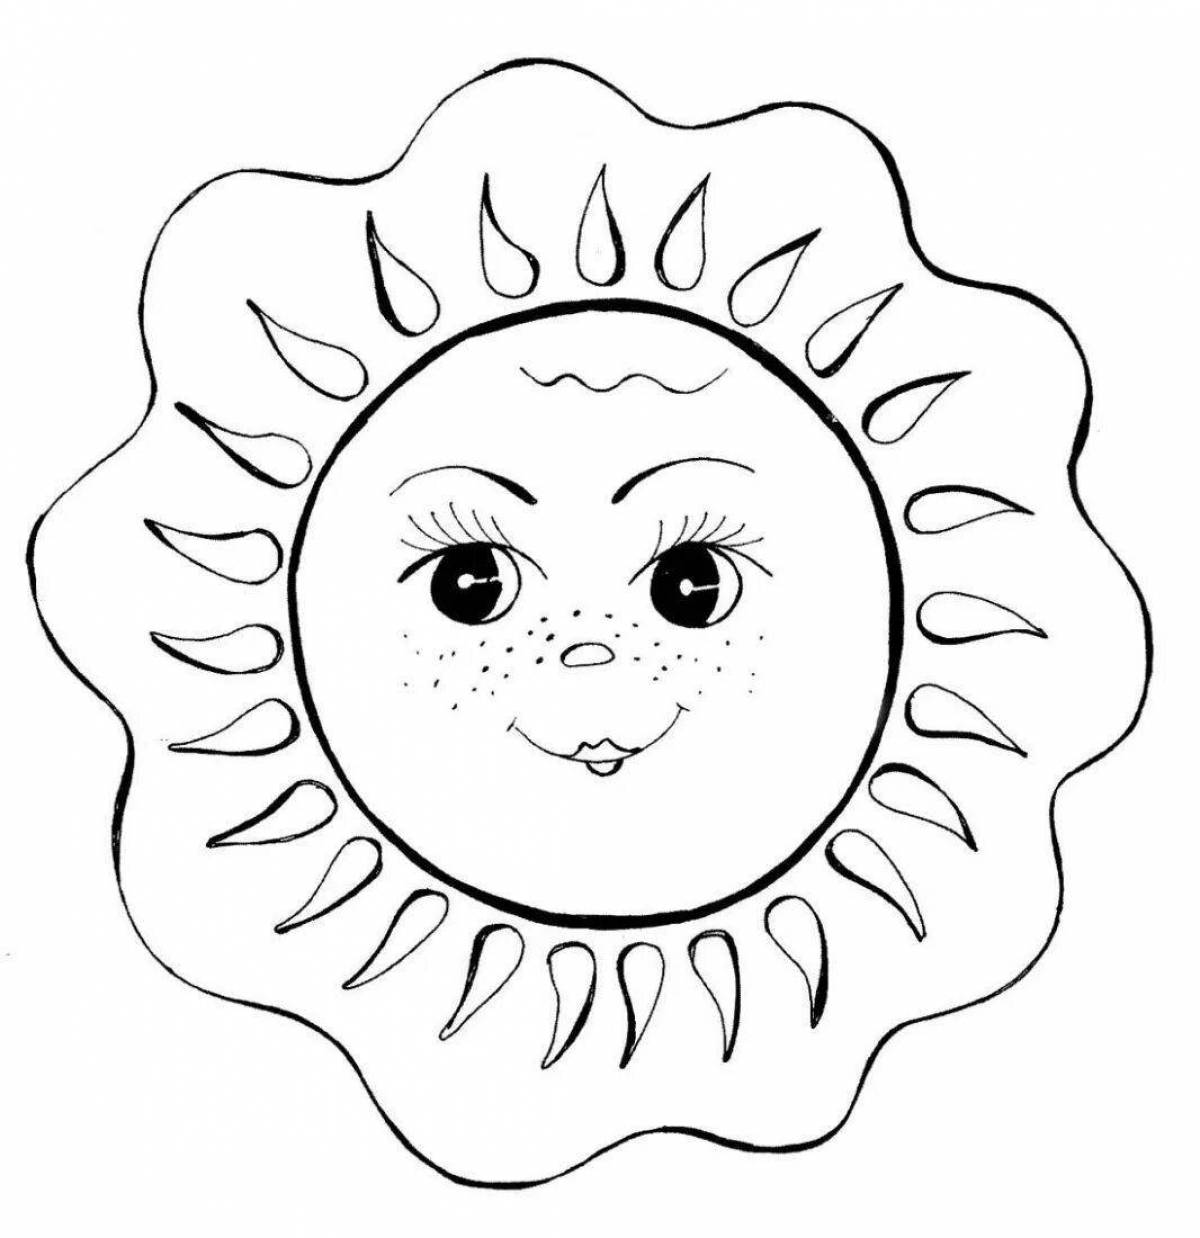 Playful carnival sun coloring page